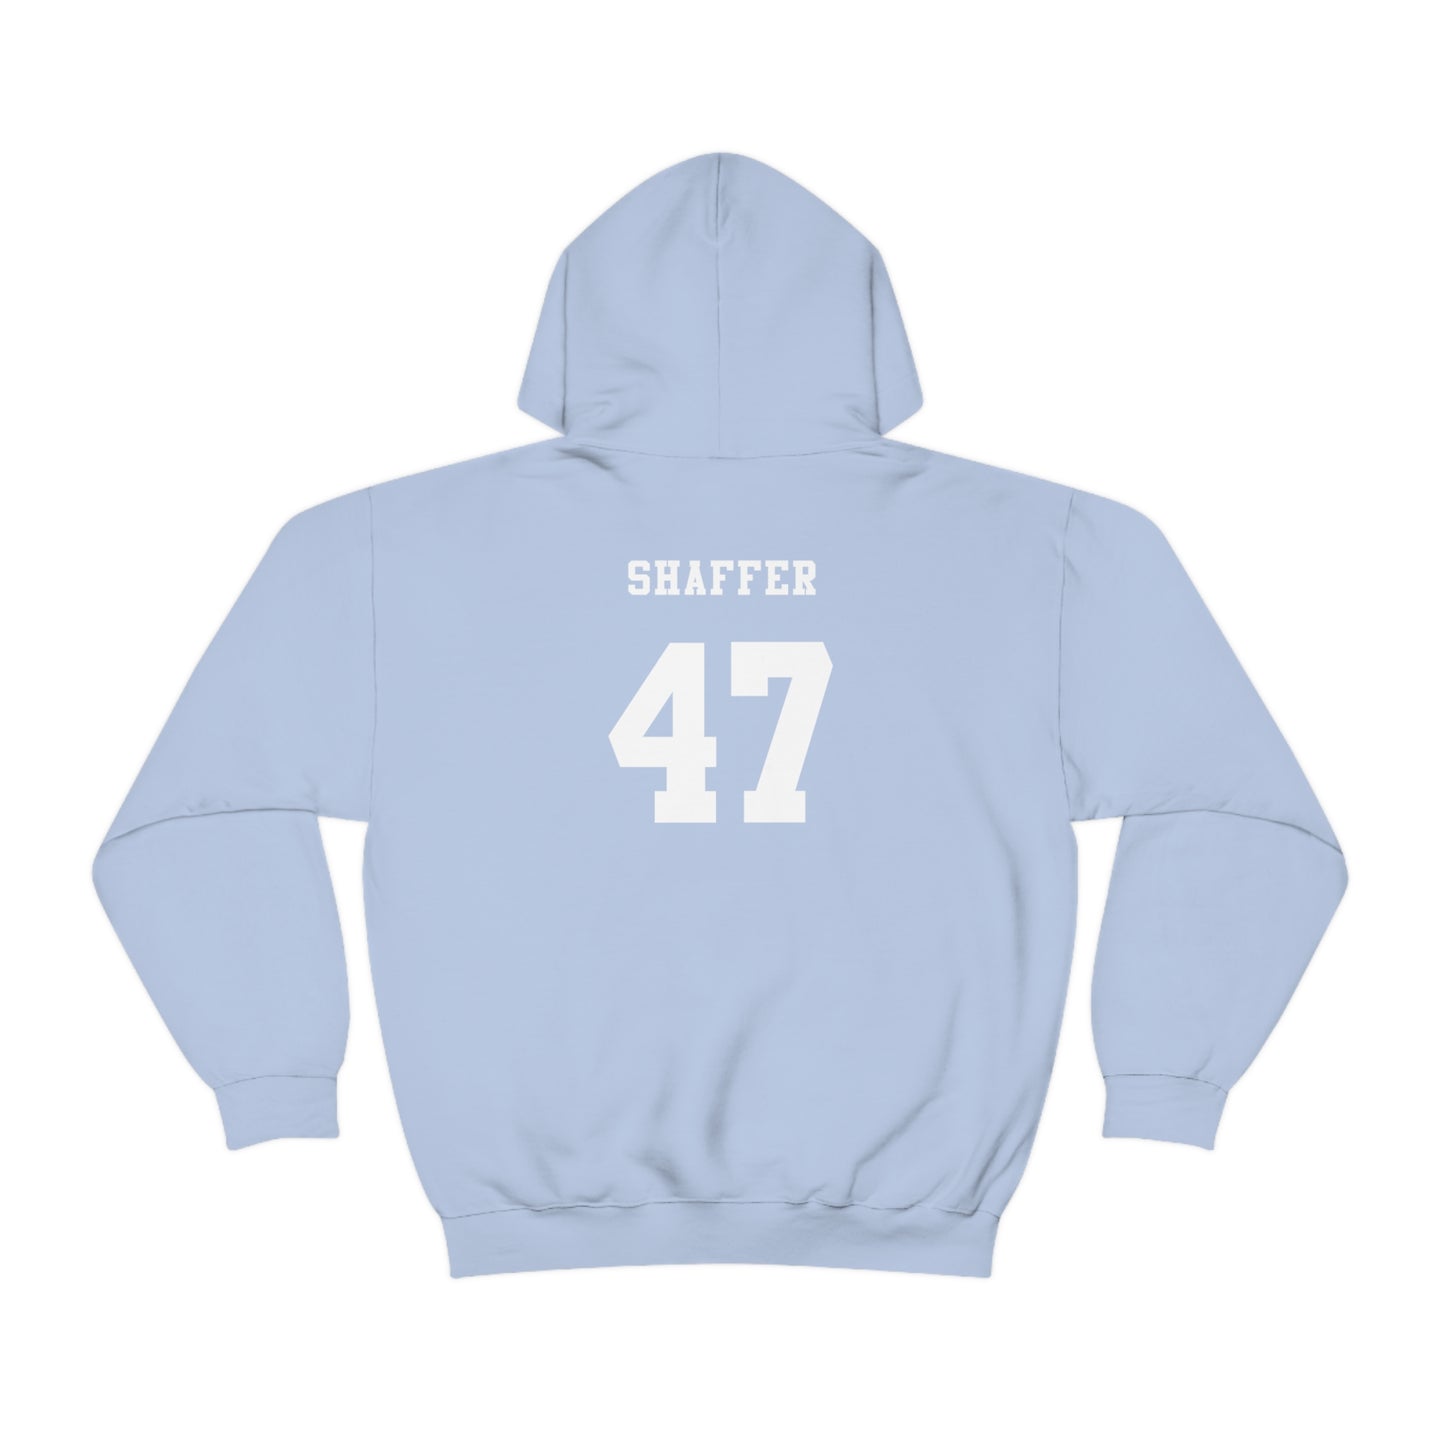 Bryson Shaffer "BS" Double Sided Hoodie